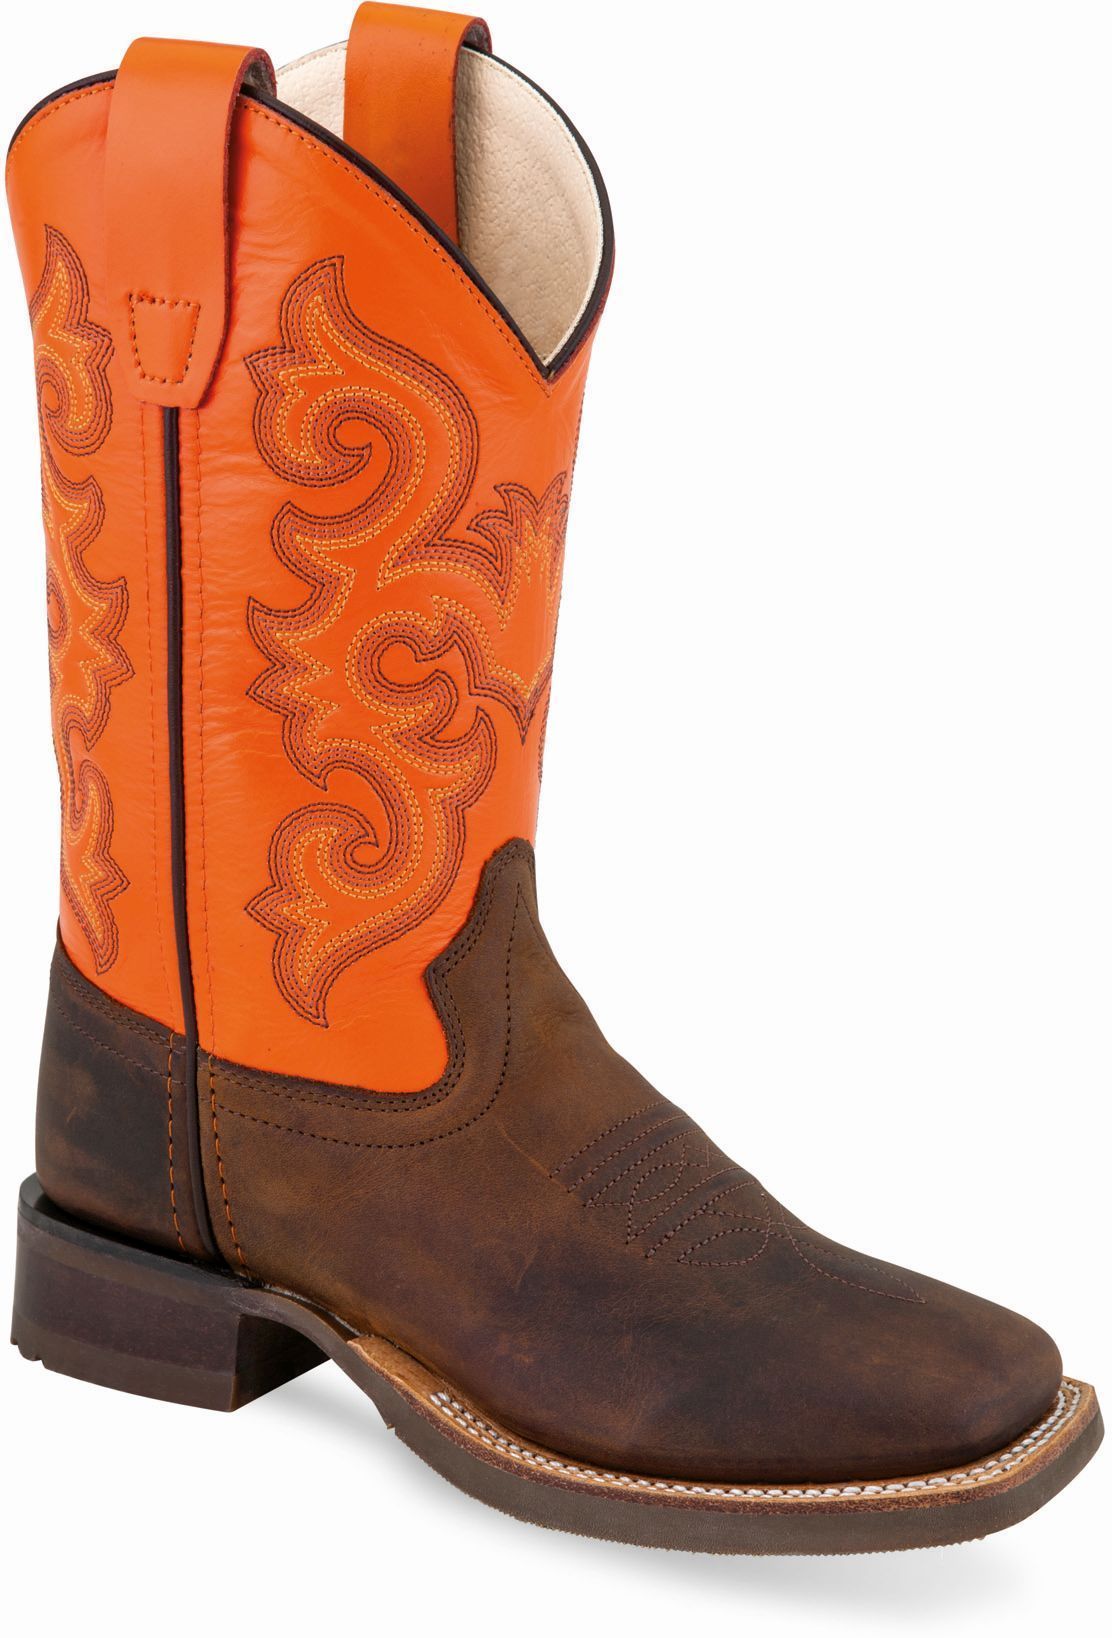 Old West Brown Foot Neon Orange Shaft Youth's Broad Square Round Toe Boots